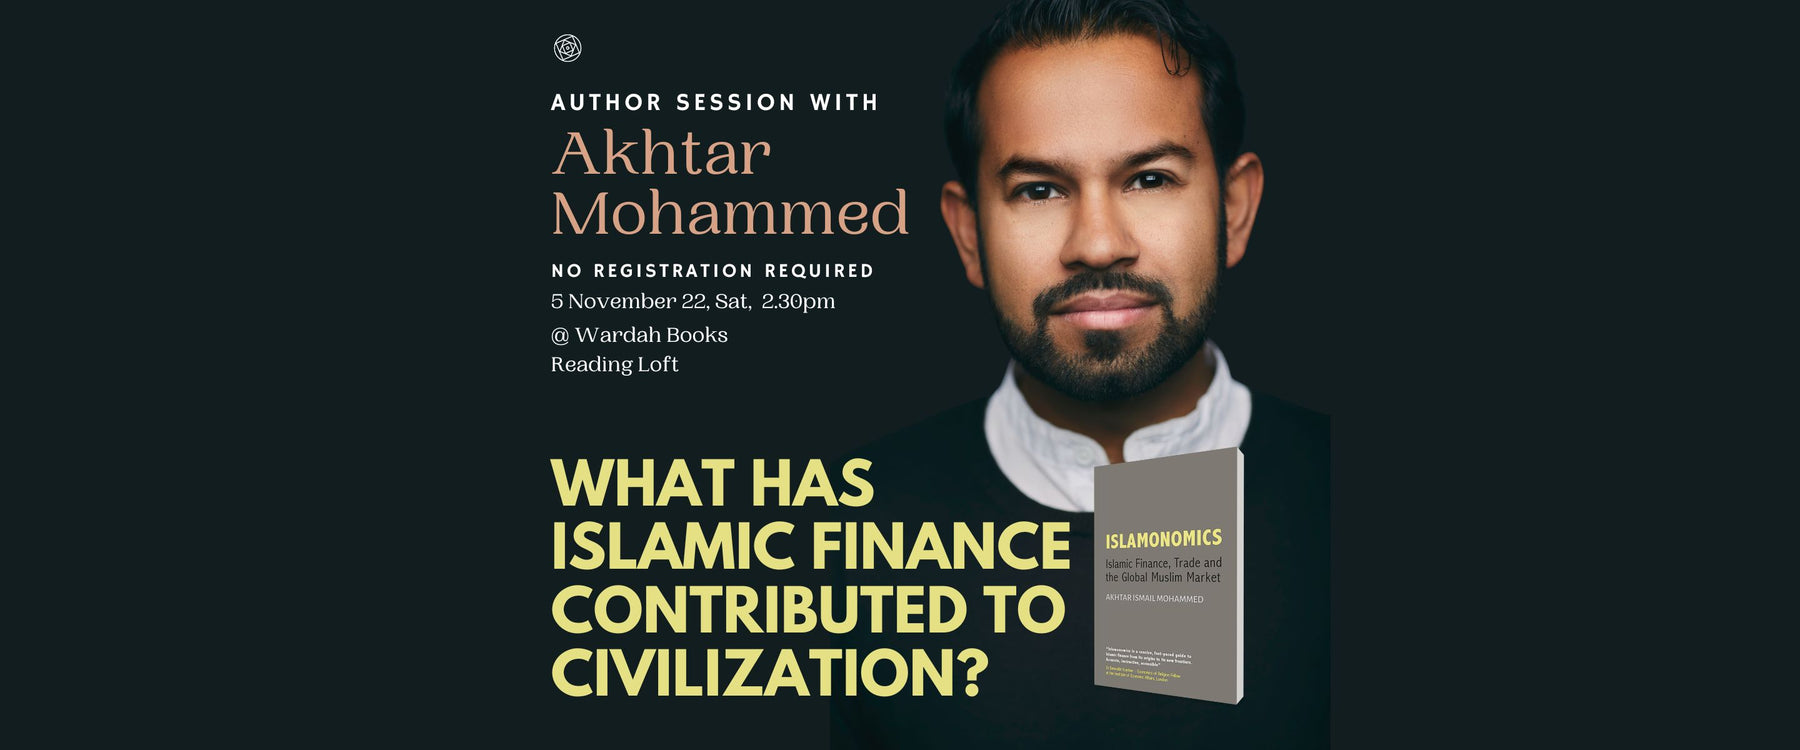 Author Session with Akhtar Mohammed